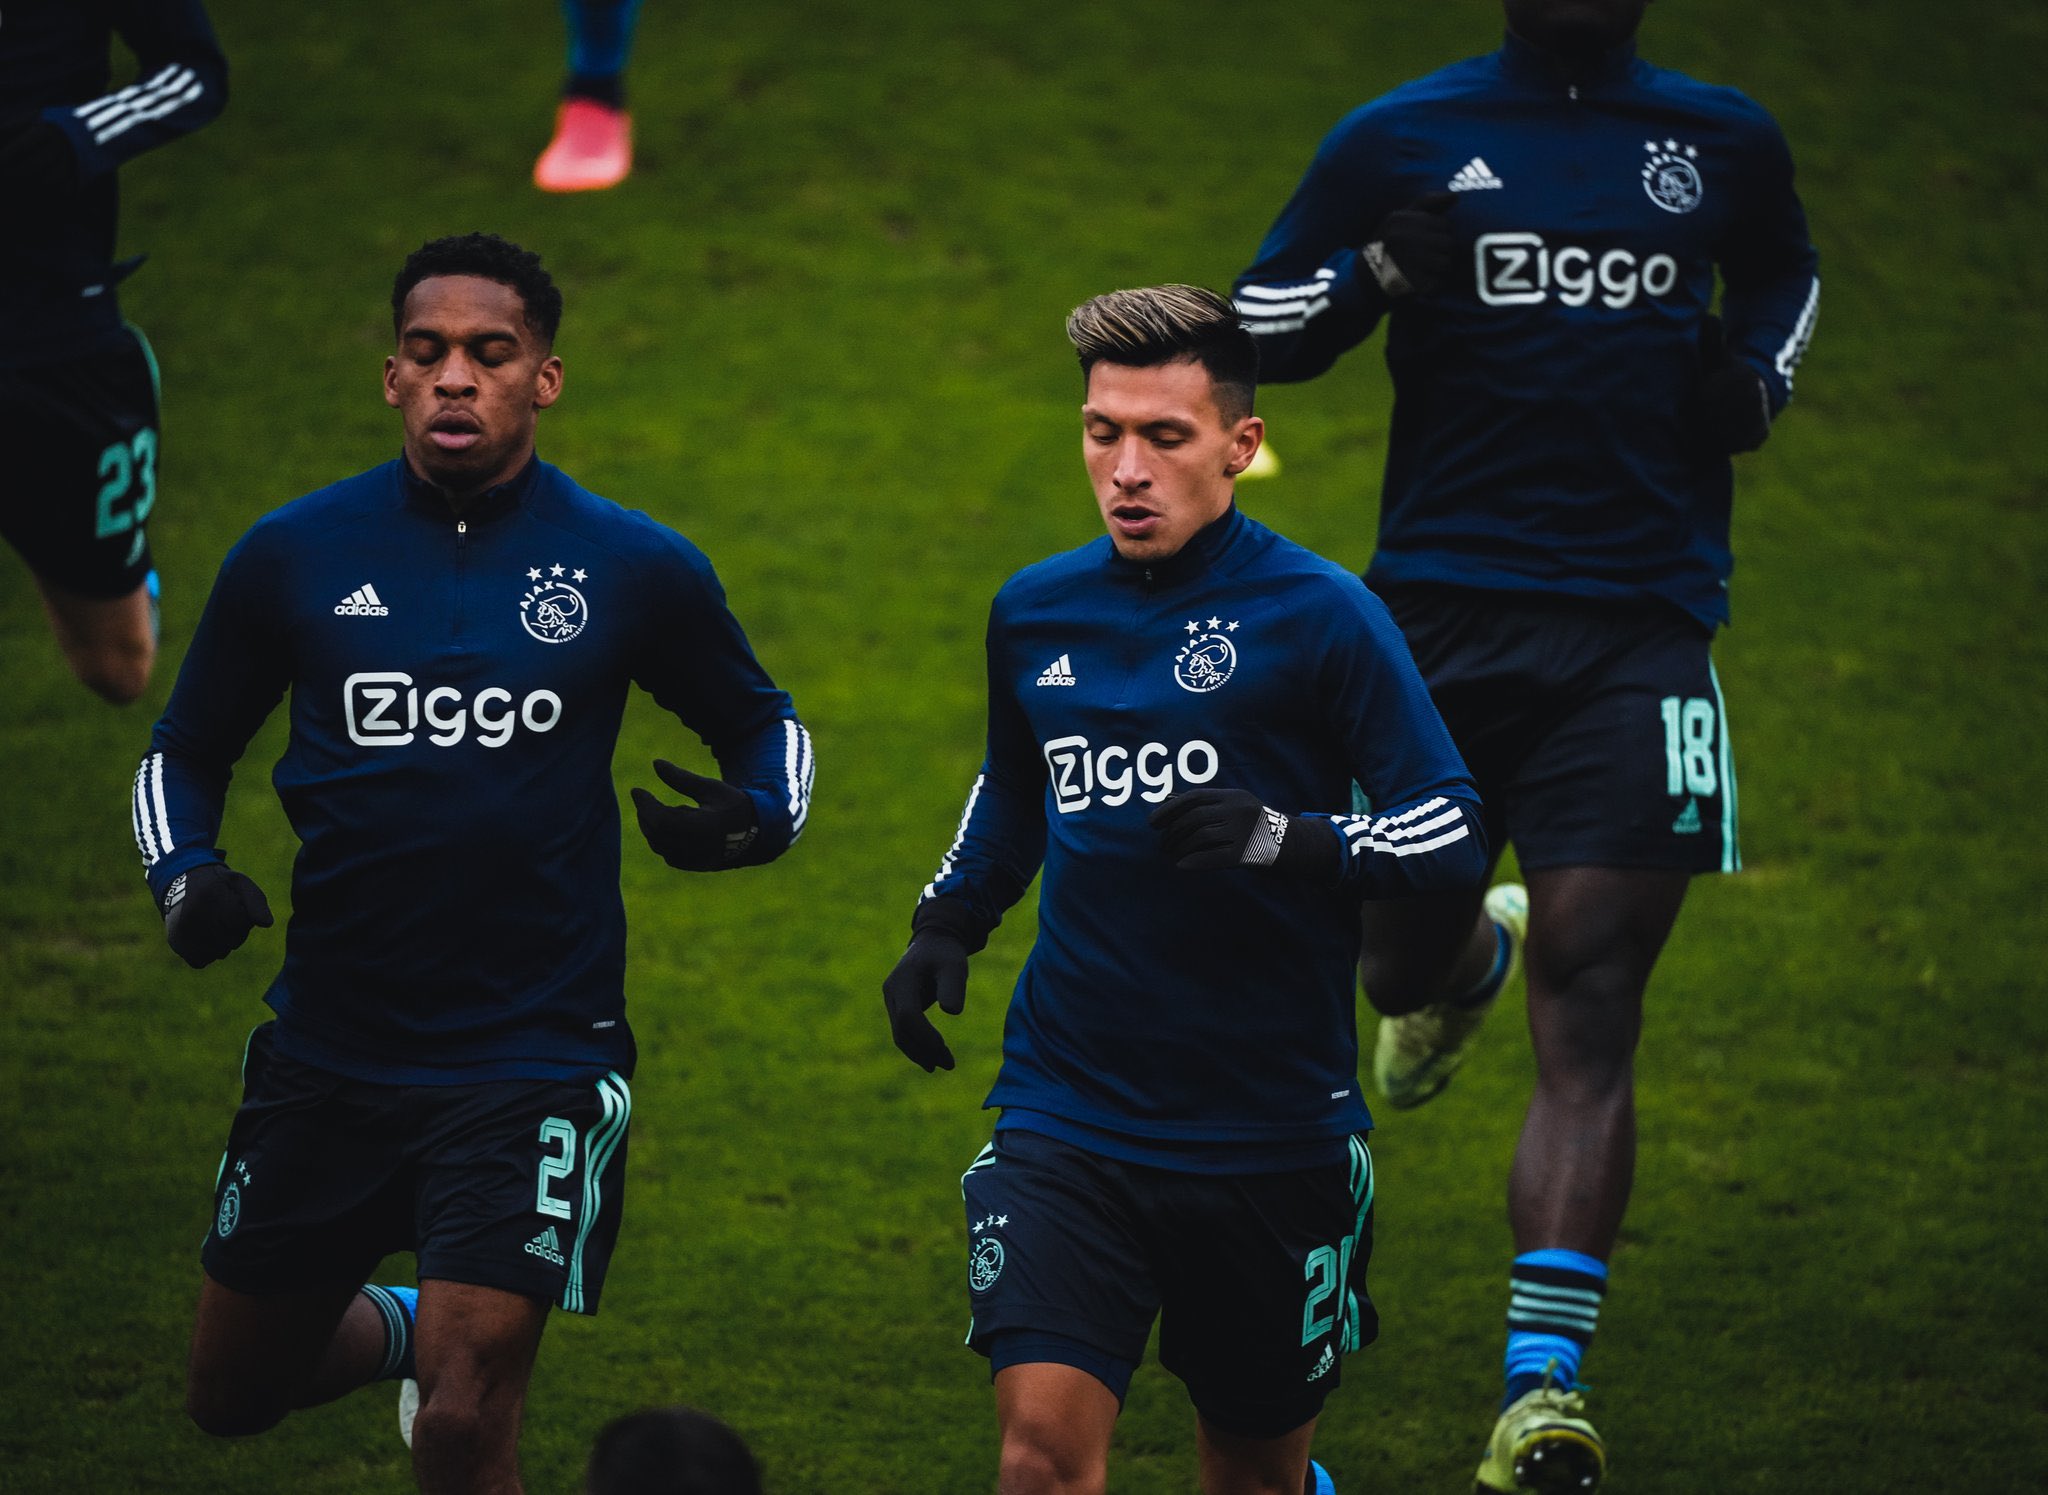 Manchester United Transfer News: Man United in talks with Ajax to sign young defender Jurrien Timber for £35million, Erik ten Hag keen to make Dutchman as FIRST SIGNING